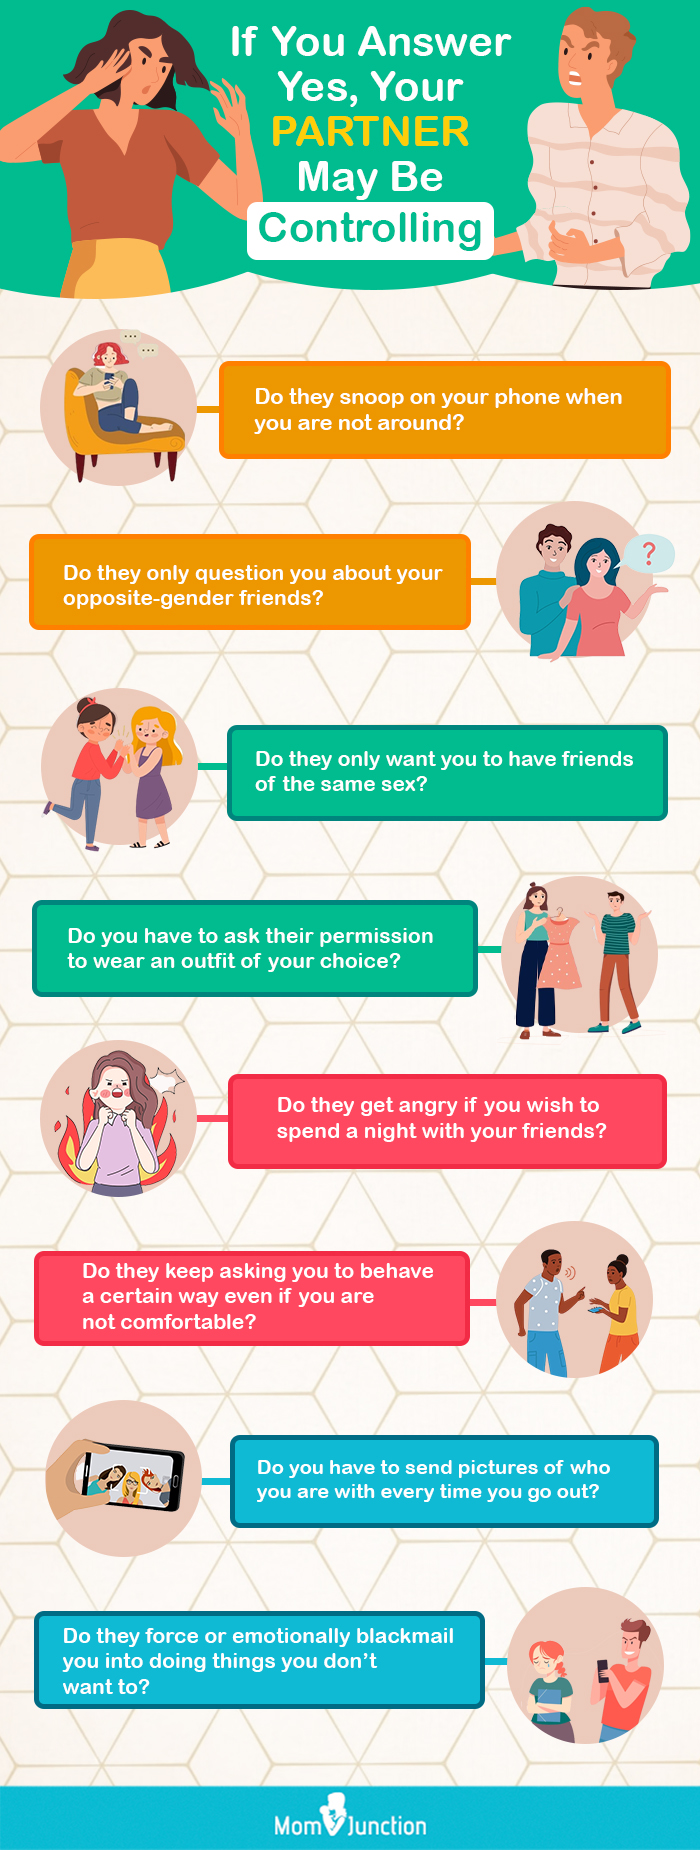 your partner may be controlling (infographic)